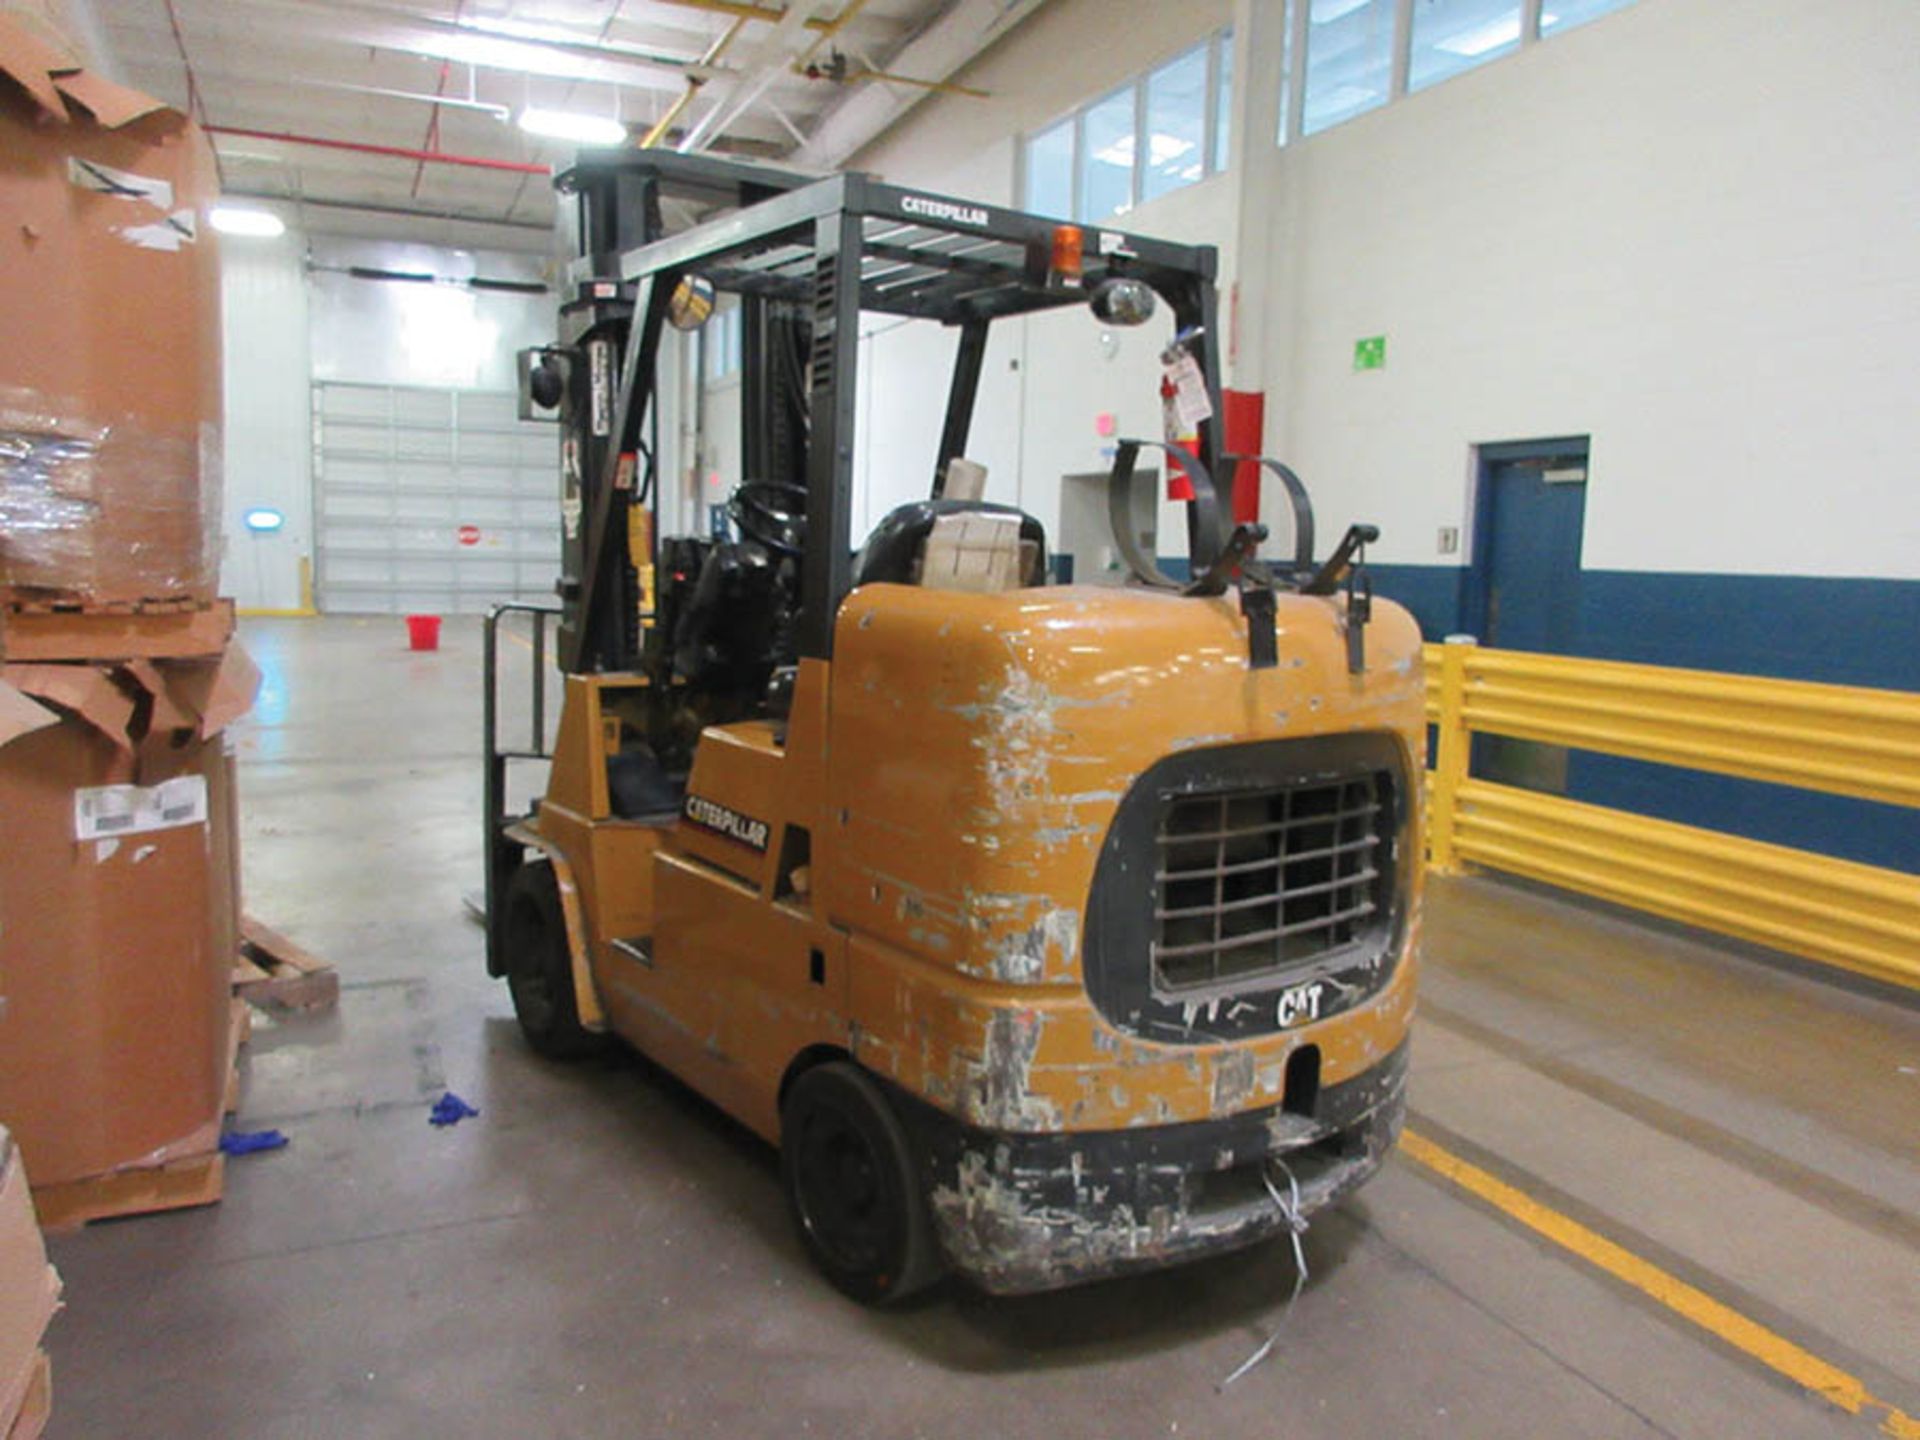 CATERPILLAR 10,000-LB. CAP. LPG FORKLIFT, 3-STAGE MAST, SIDE SHIFT, 209'' MAX LOAD HEIGHT, LEVER - Image 4 of 6